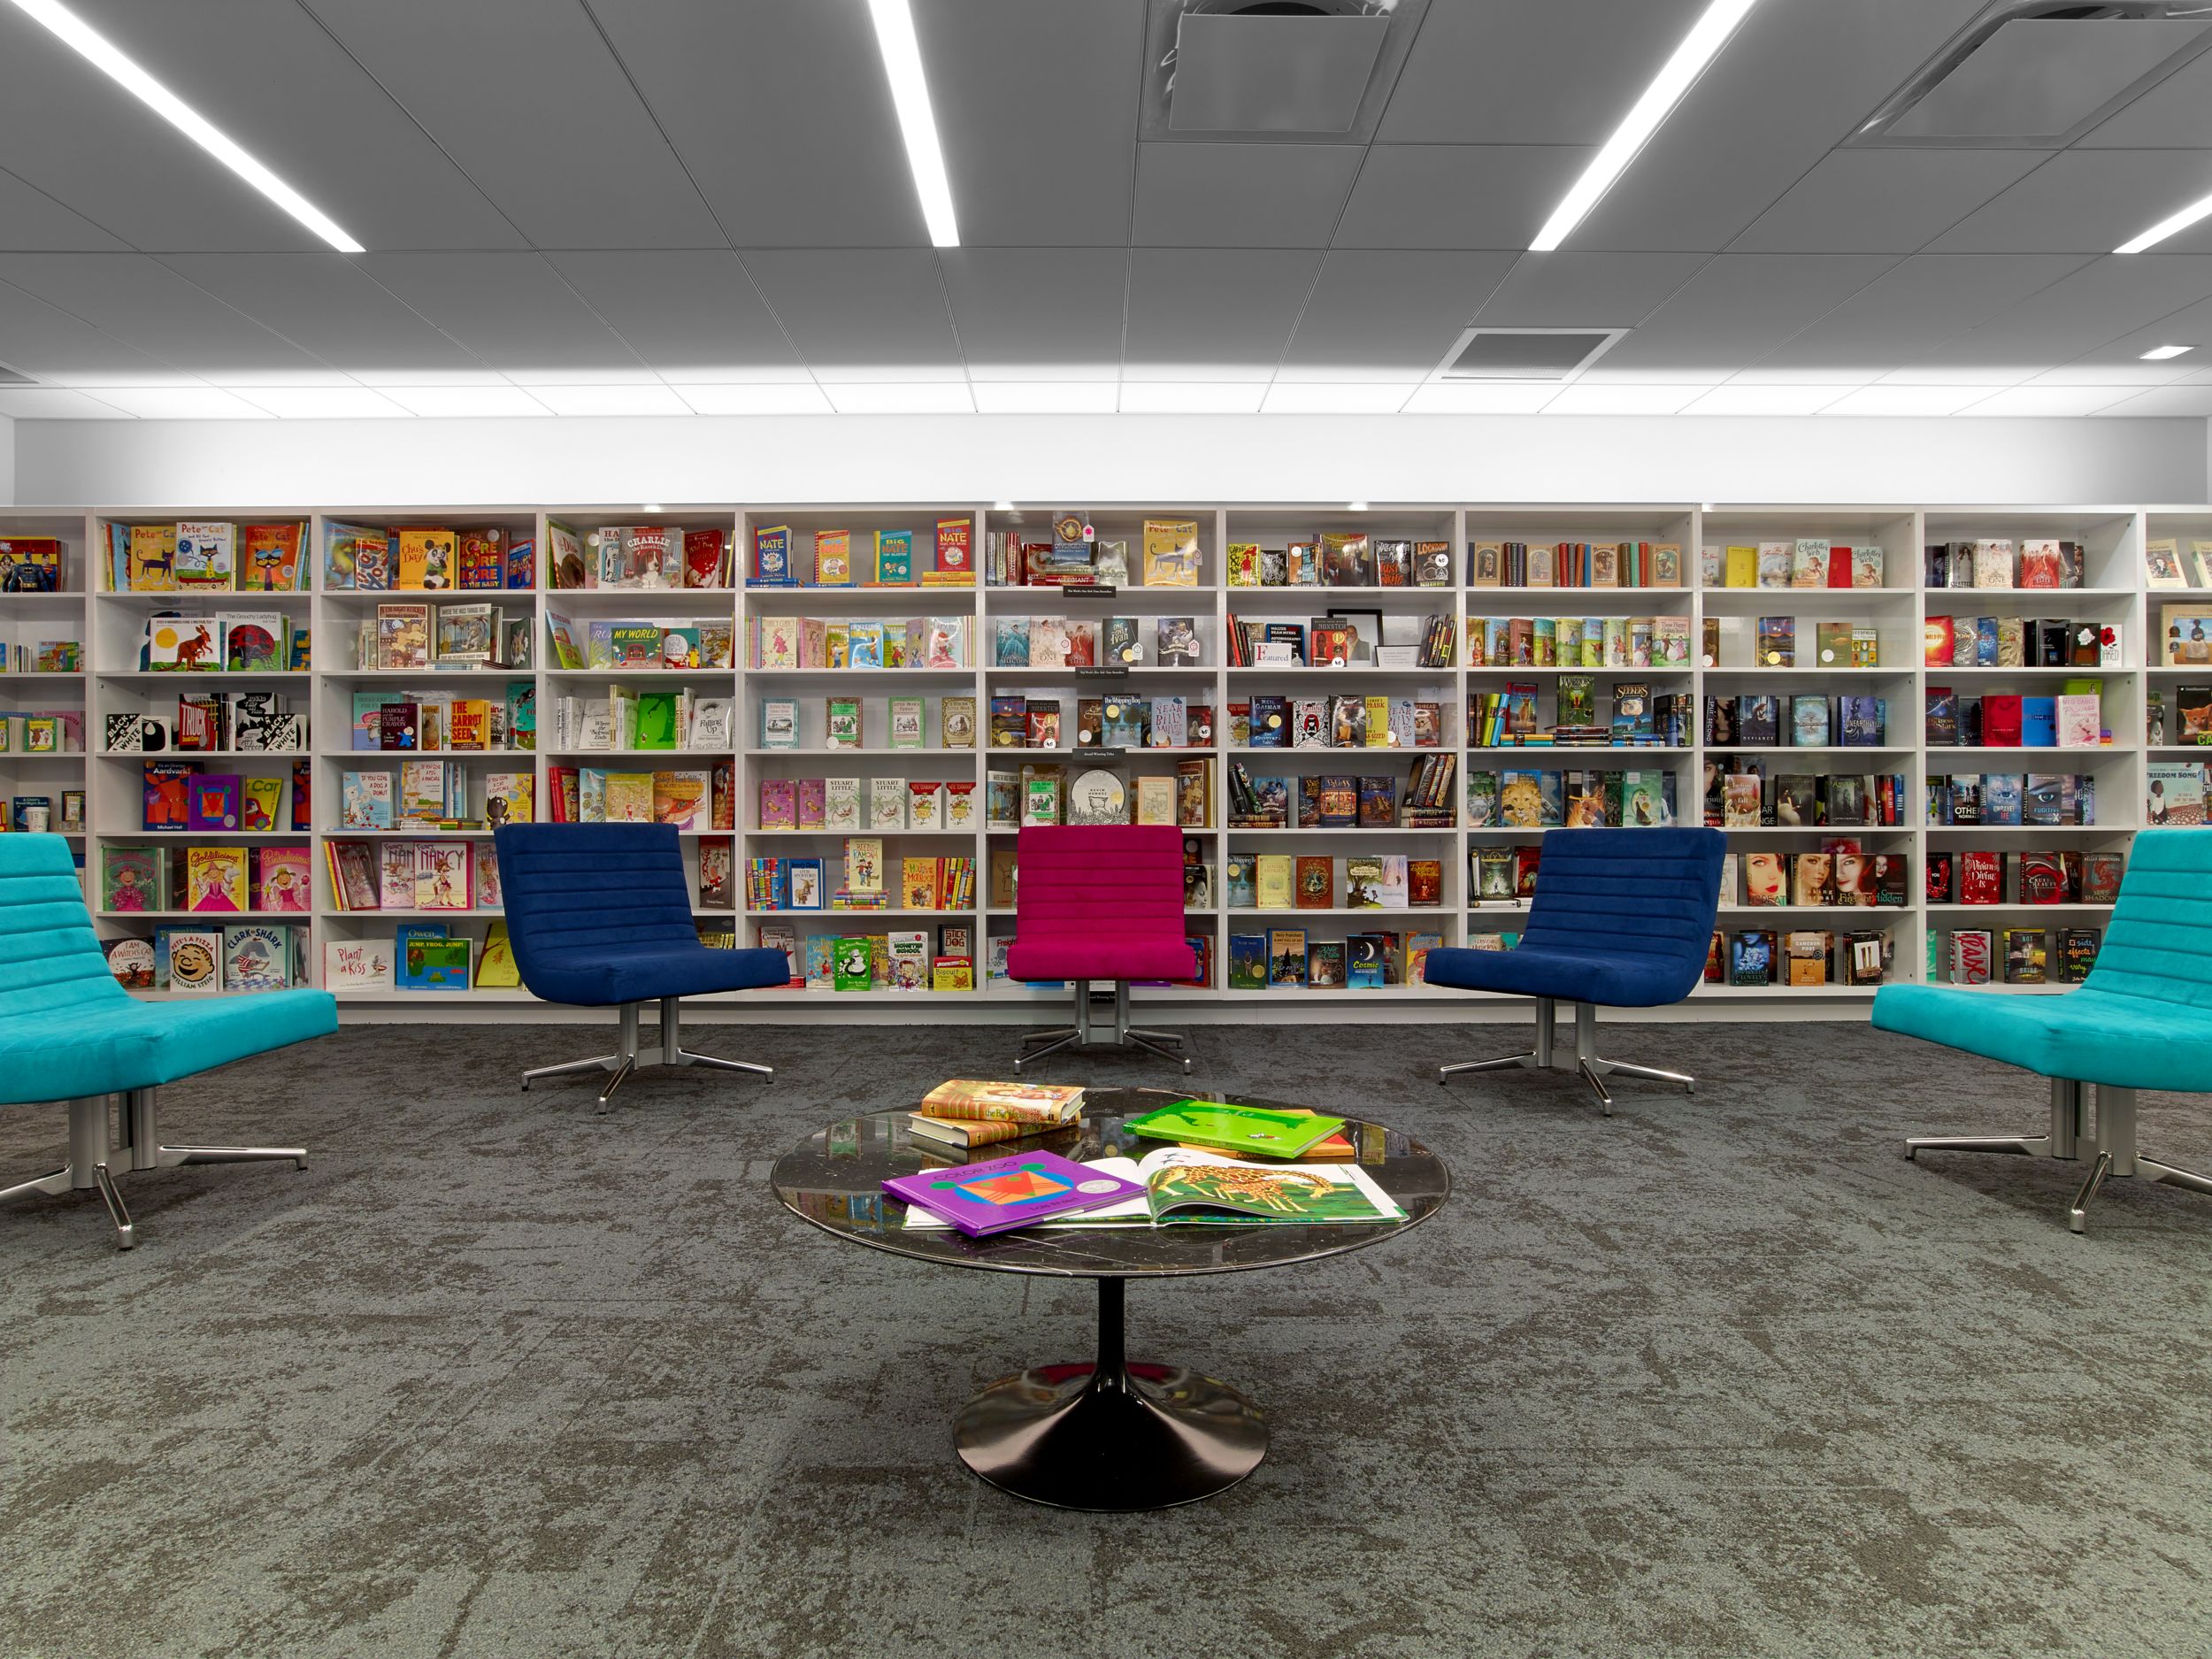 Interface B603 carpet tile in area with bookshelves and colorful chairs numéro d’image 3